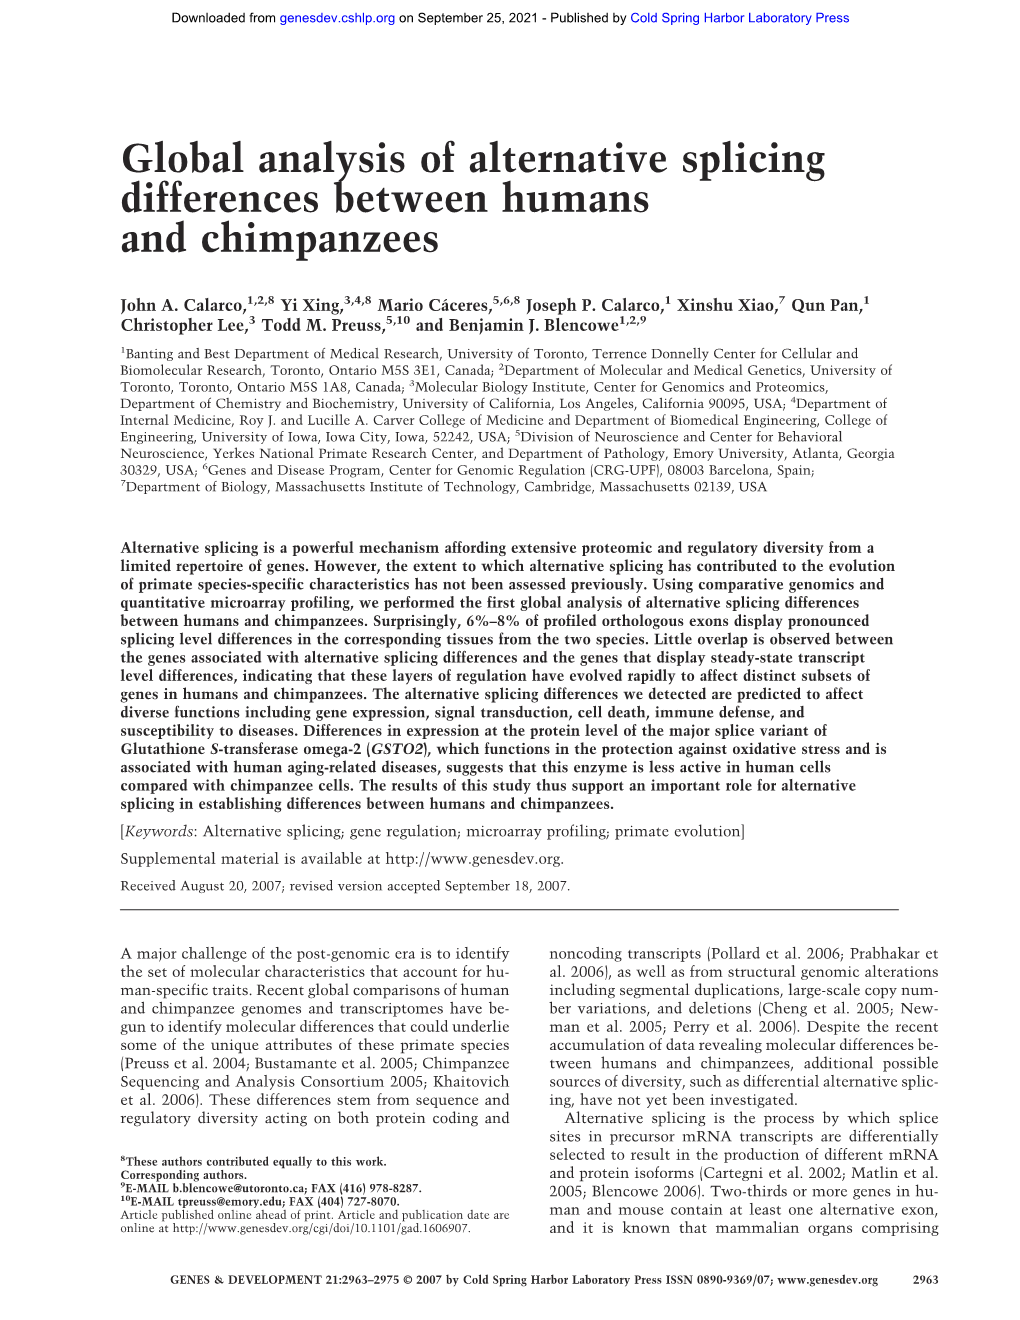 Global Analysis of Alternative Splicing Differences Between Humans and Chimpanzees